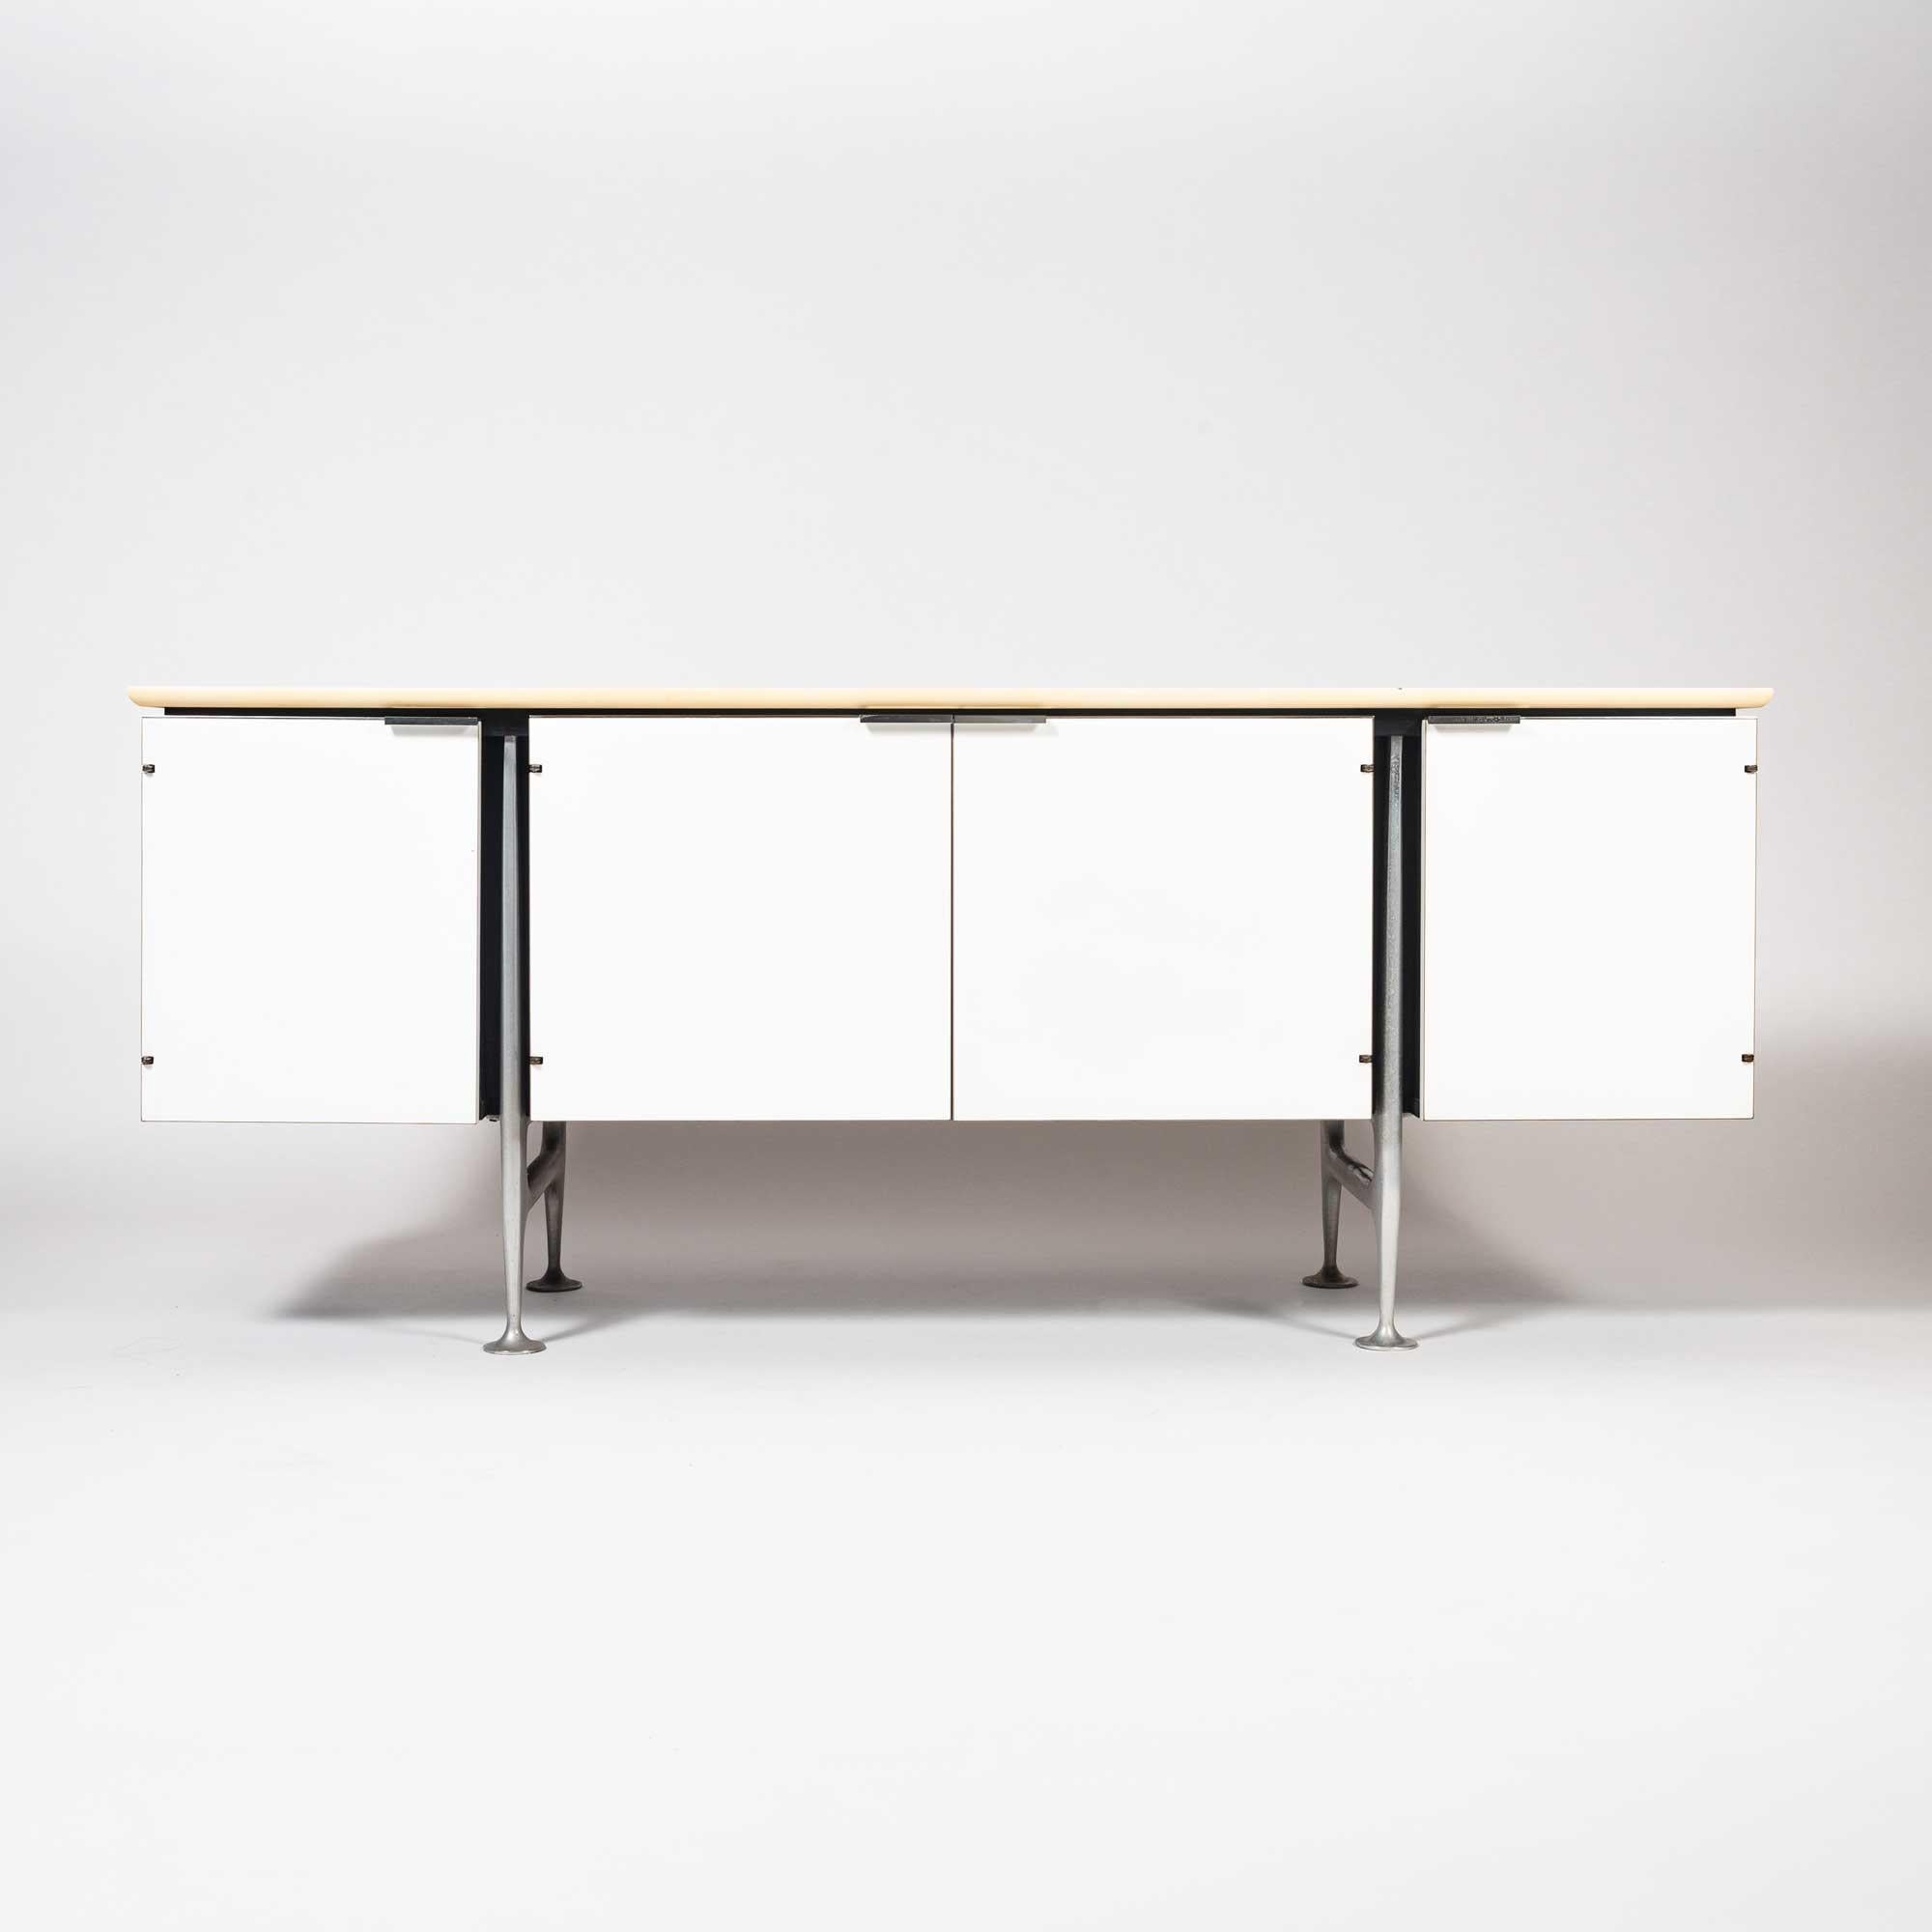 From Wright Auction: The cabinet was a prototype model for The Girard Group created for the Herman Miller showroom; There were only two known to be ever made. The cast aluminum legs hold up laminated frame, with two drawers and one glass shelf. The